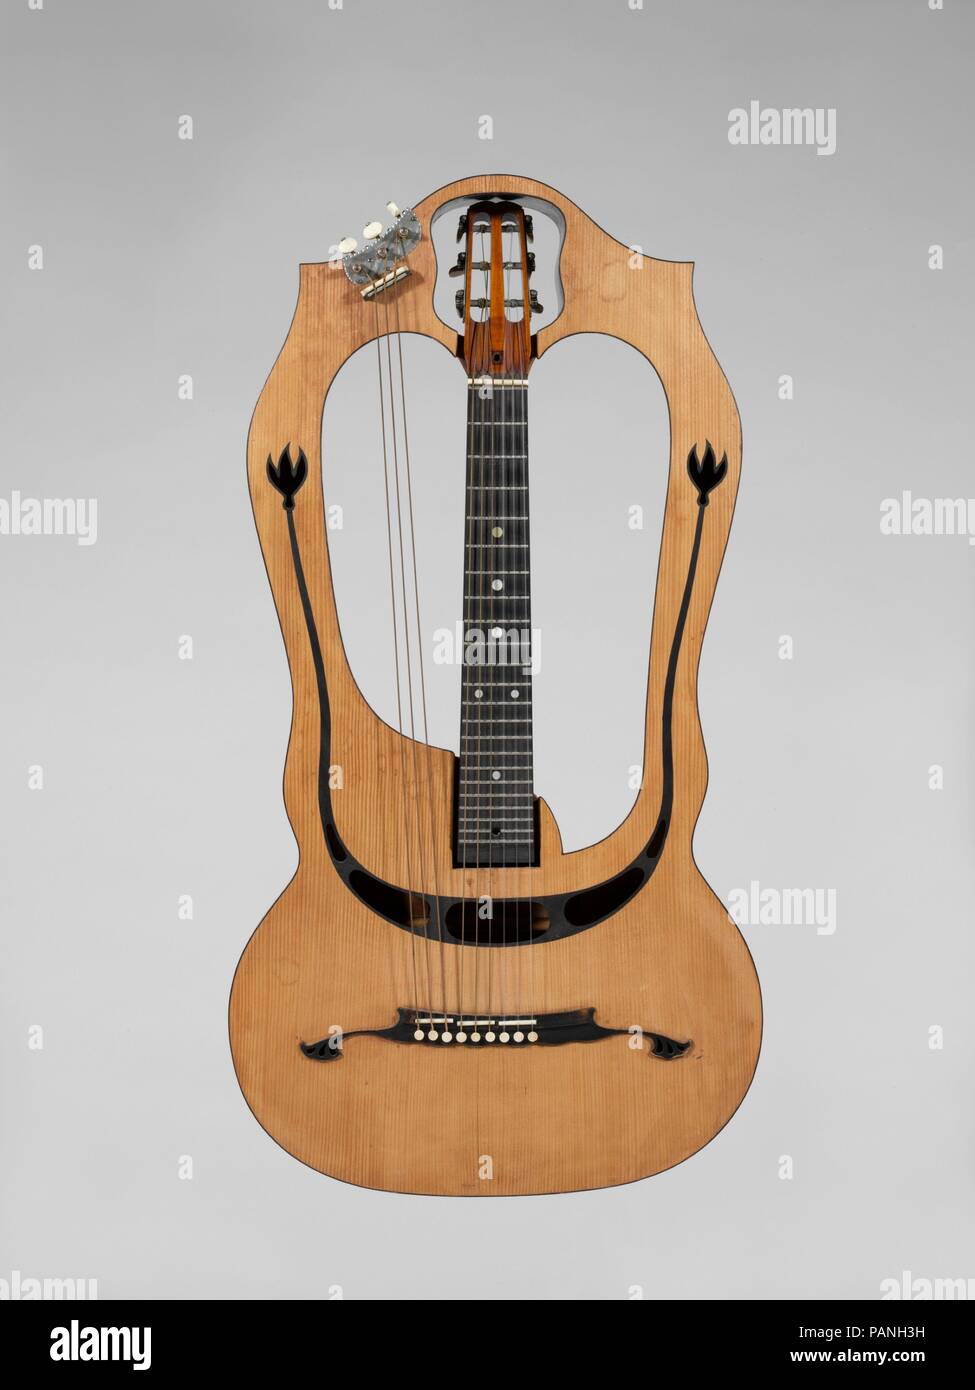 Lyre Guitar High Resolution Stock Photography and Images - Alamy